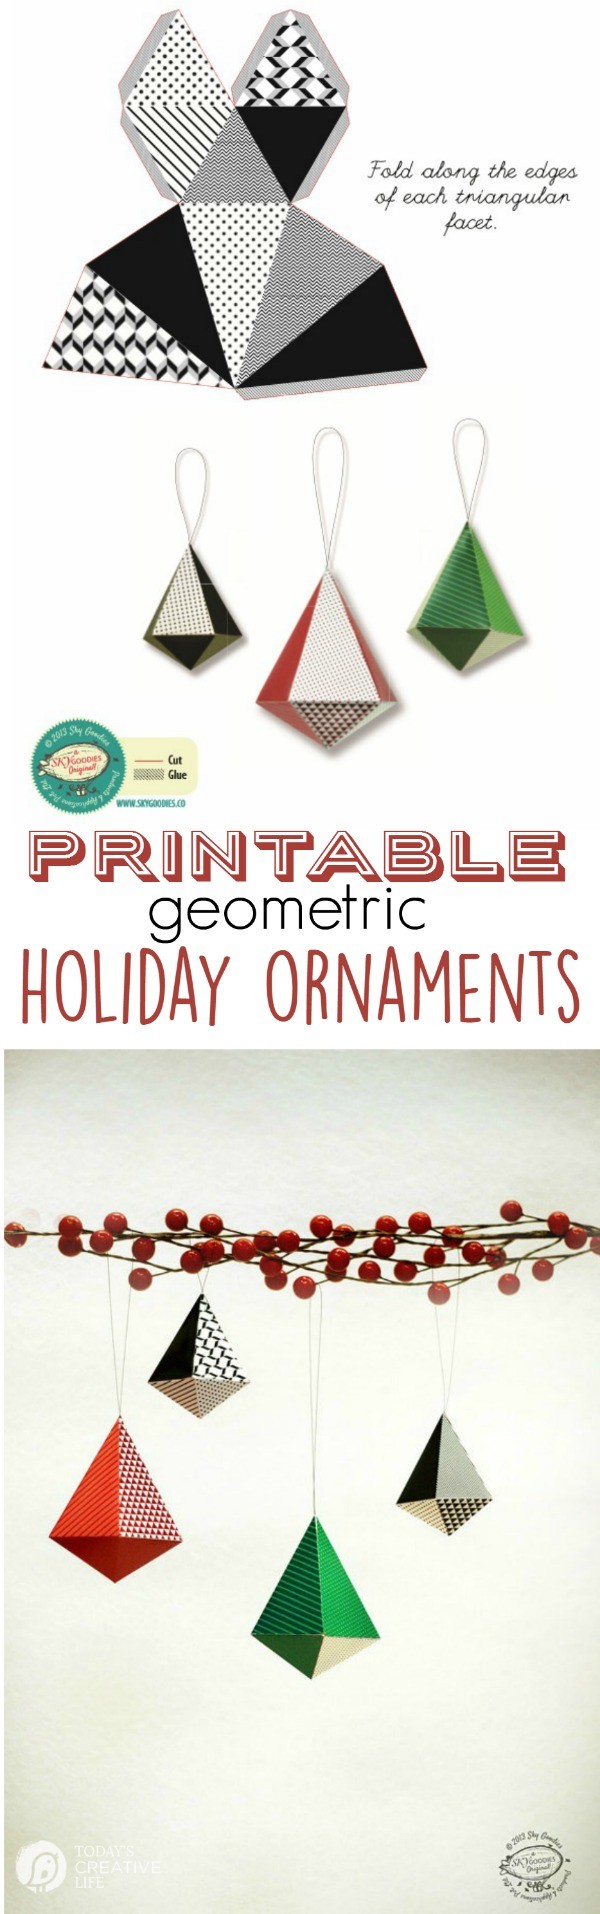 Printable Geometric Holiday Ornaments for a modern minimalist tree or traditional! Easy DIY holiday ornaments. Find your free download on TodaysCreativeLIfe.com